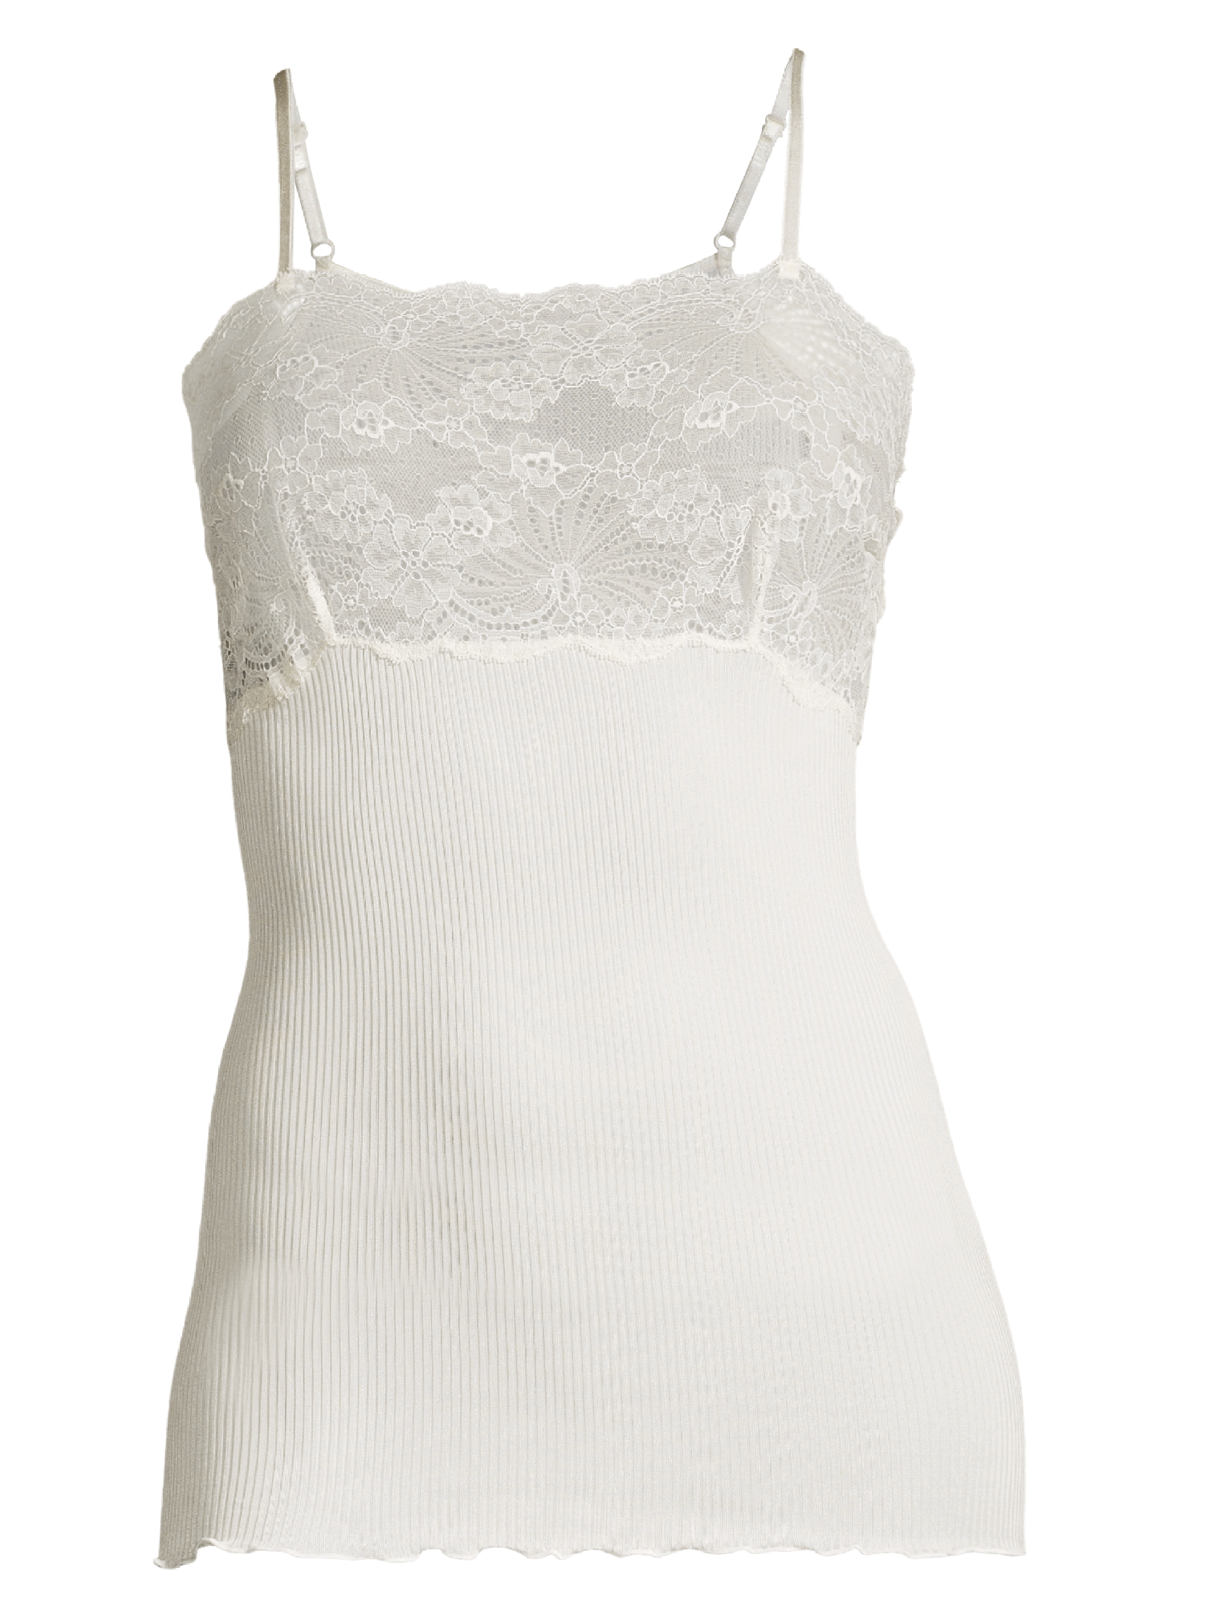 Pure Silk Camisole Top with Leavers Lace 9460 - Oscalito